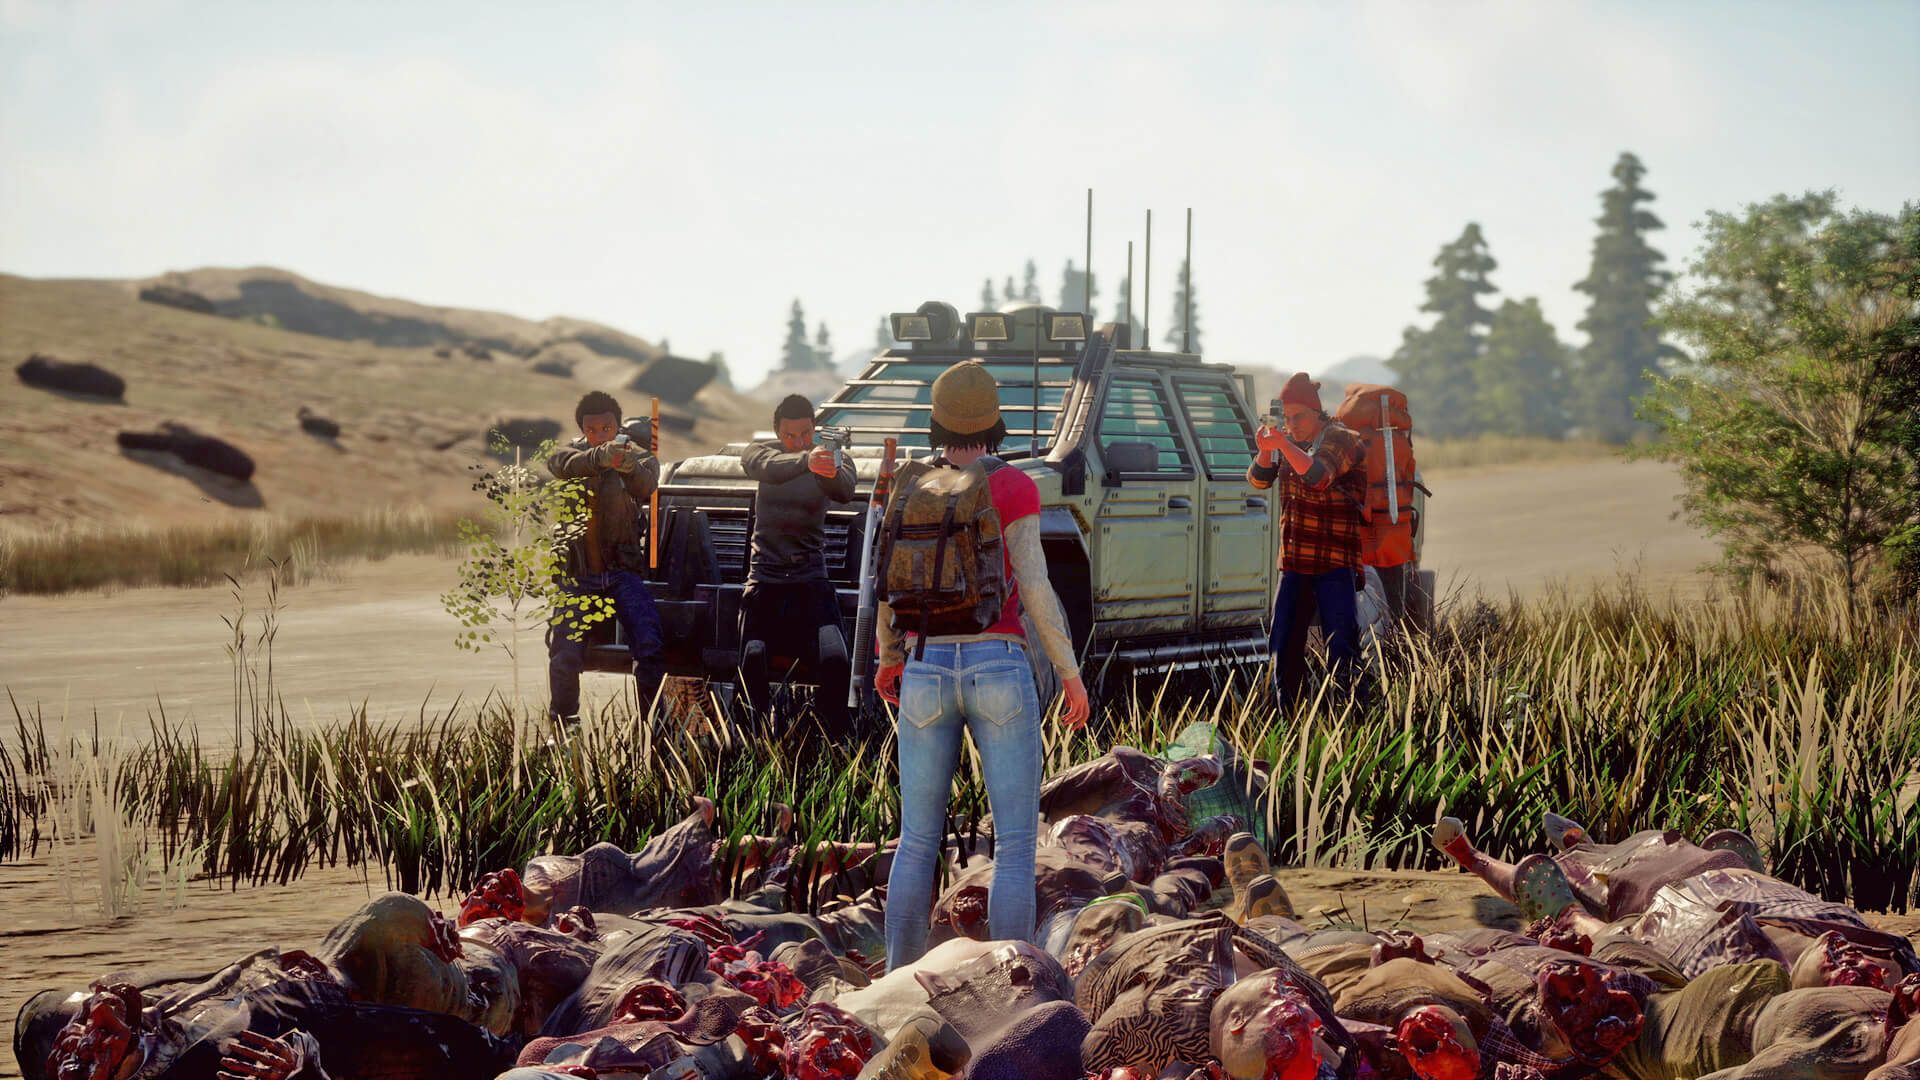 State of decay 2 trainer 2019 - tavilx